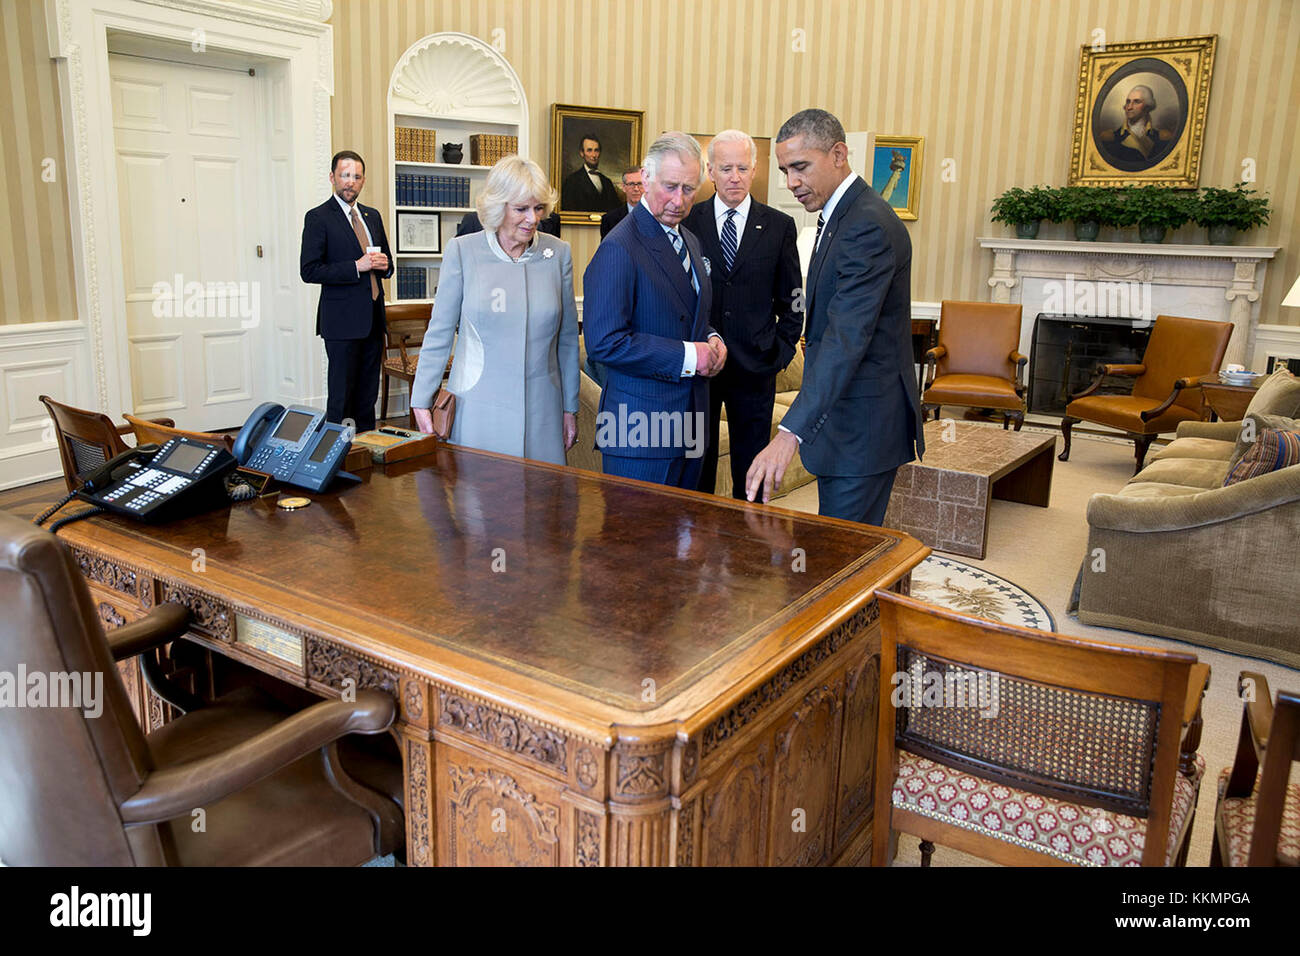 President Barack Obama and Vice President Joe Biden discuss the Resolute  Desk with Charles, Prince of Wales and Camilla, Duchess of Cornwall, prior  to a meeting in the Oval Office, March 19,